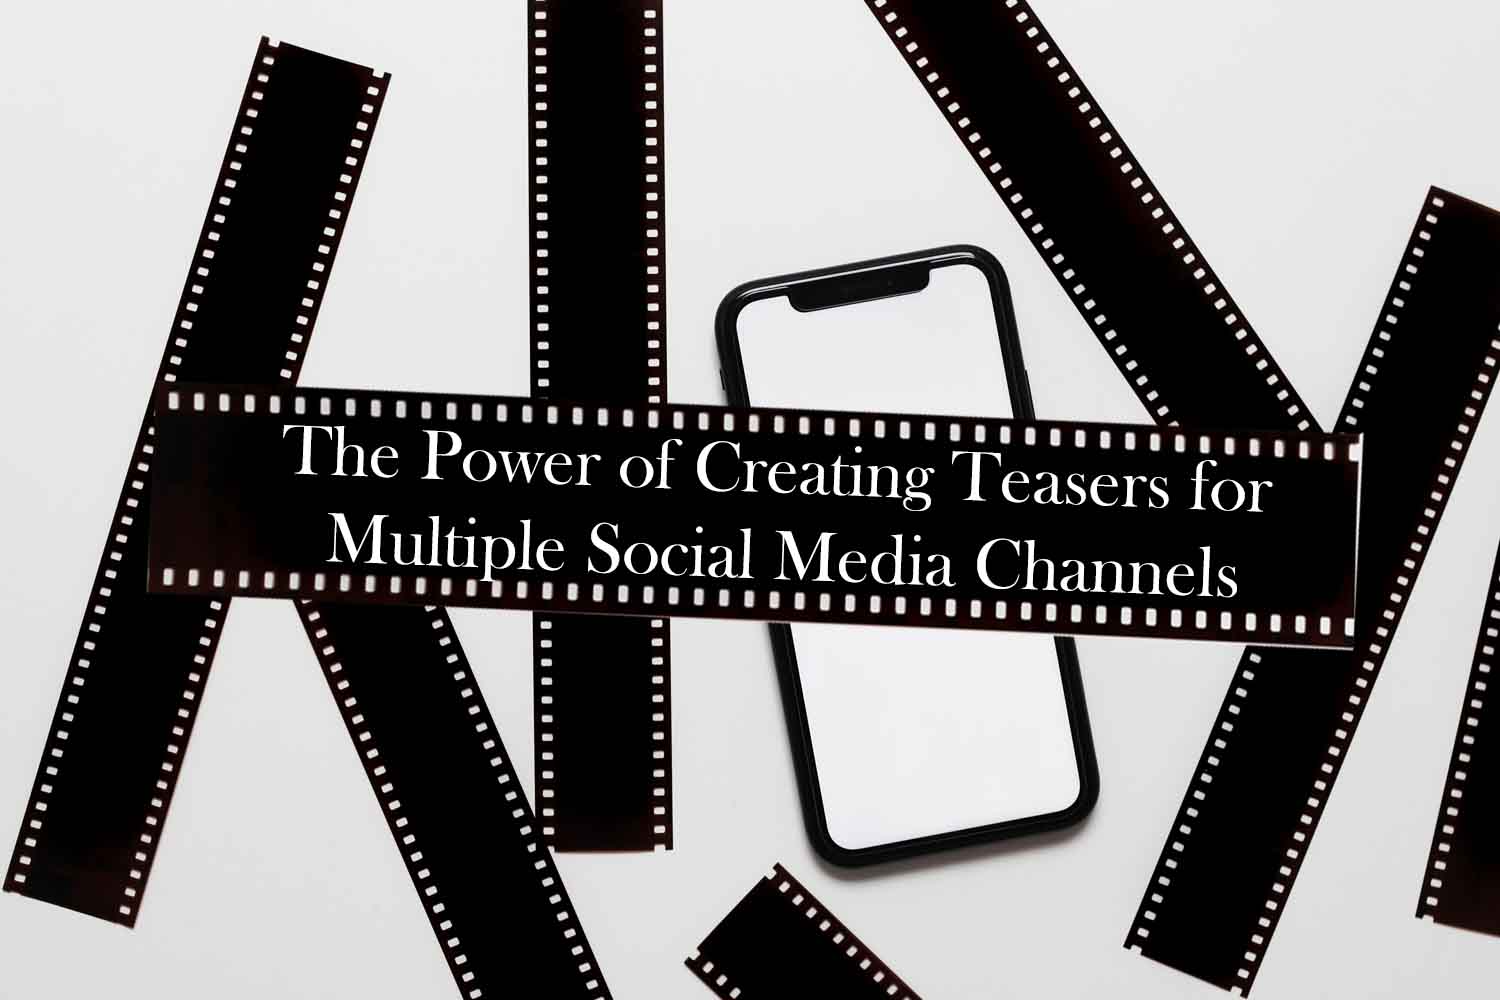 The Power of Creating Teasers for Multiple Social Media Channels